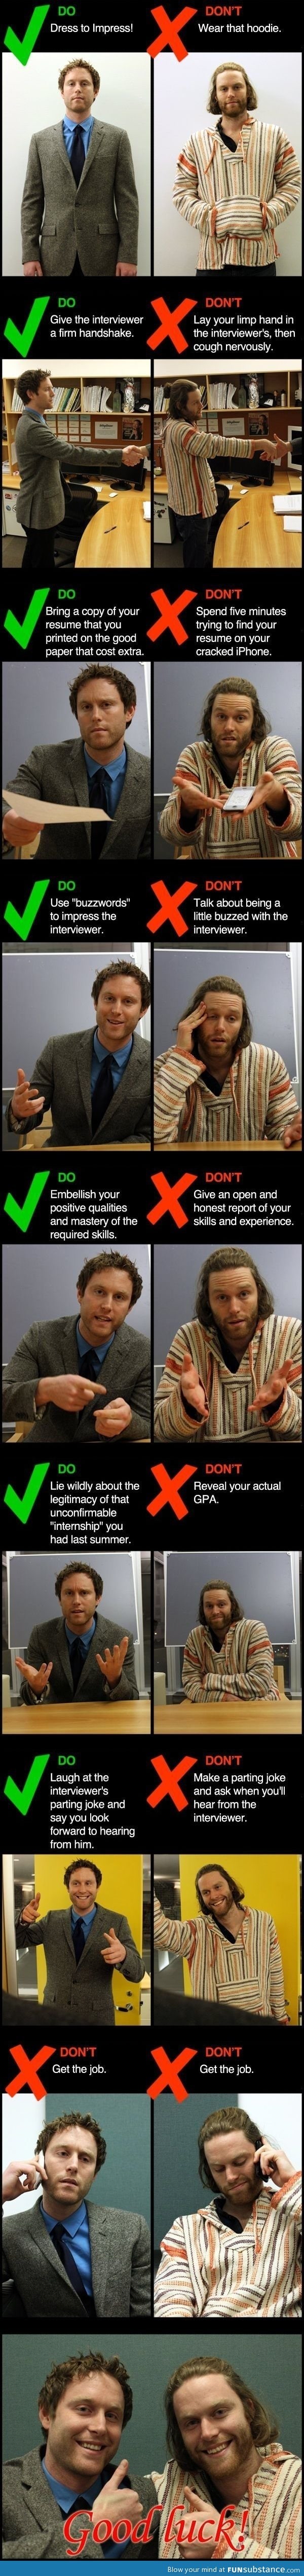 Do and dont's of job interviews